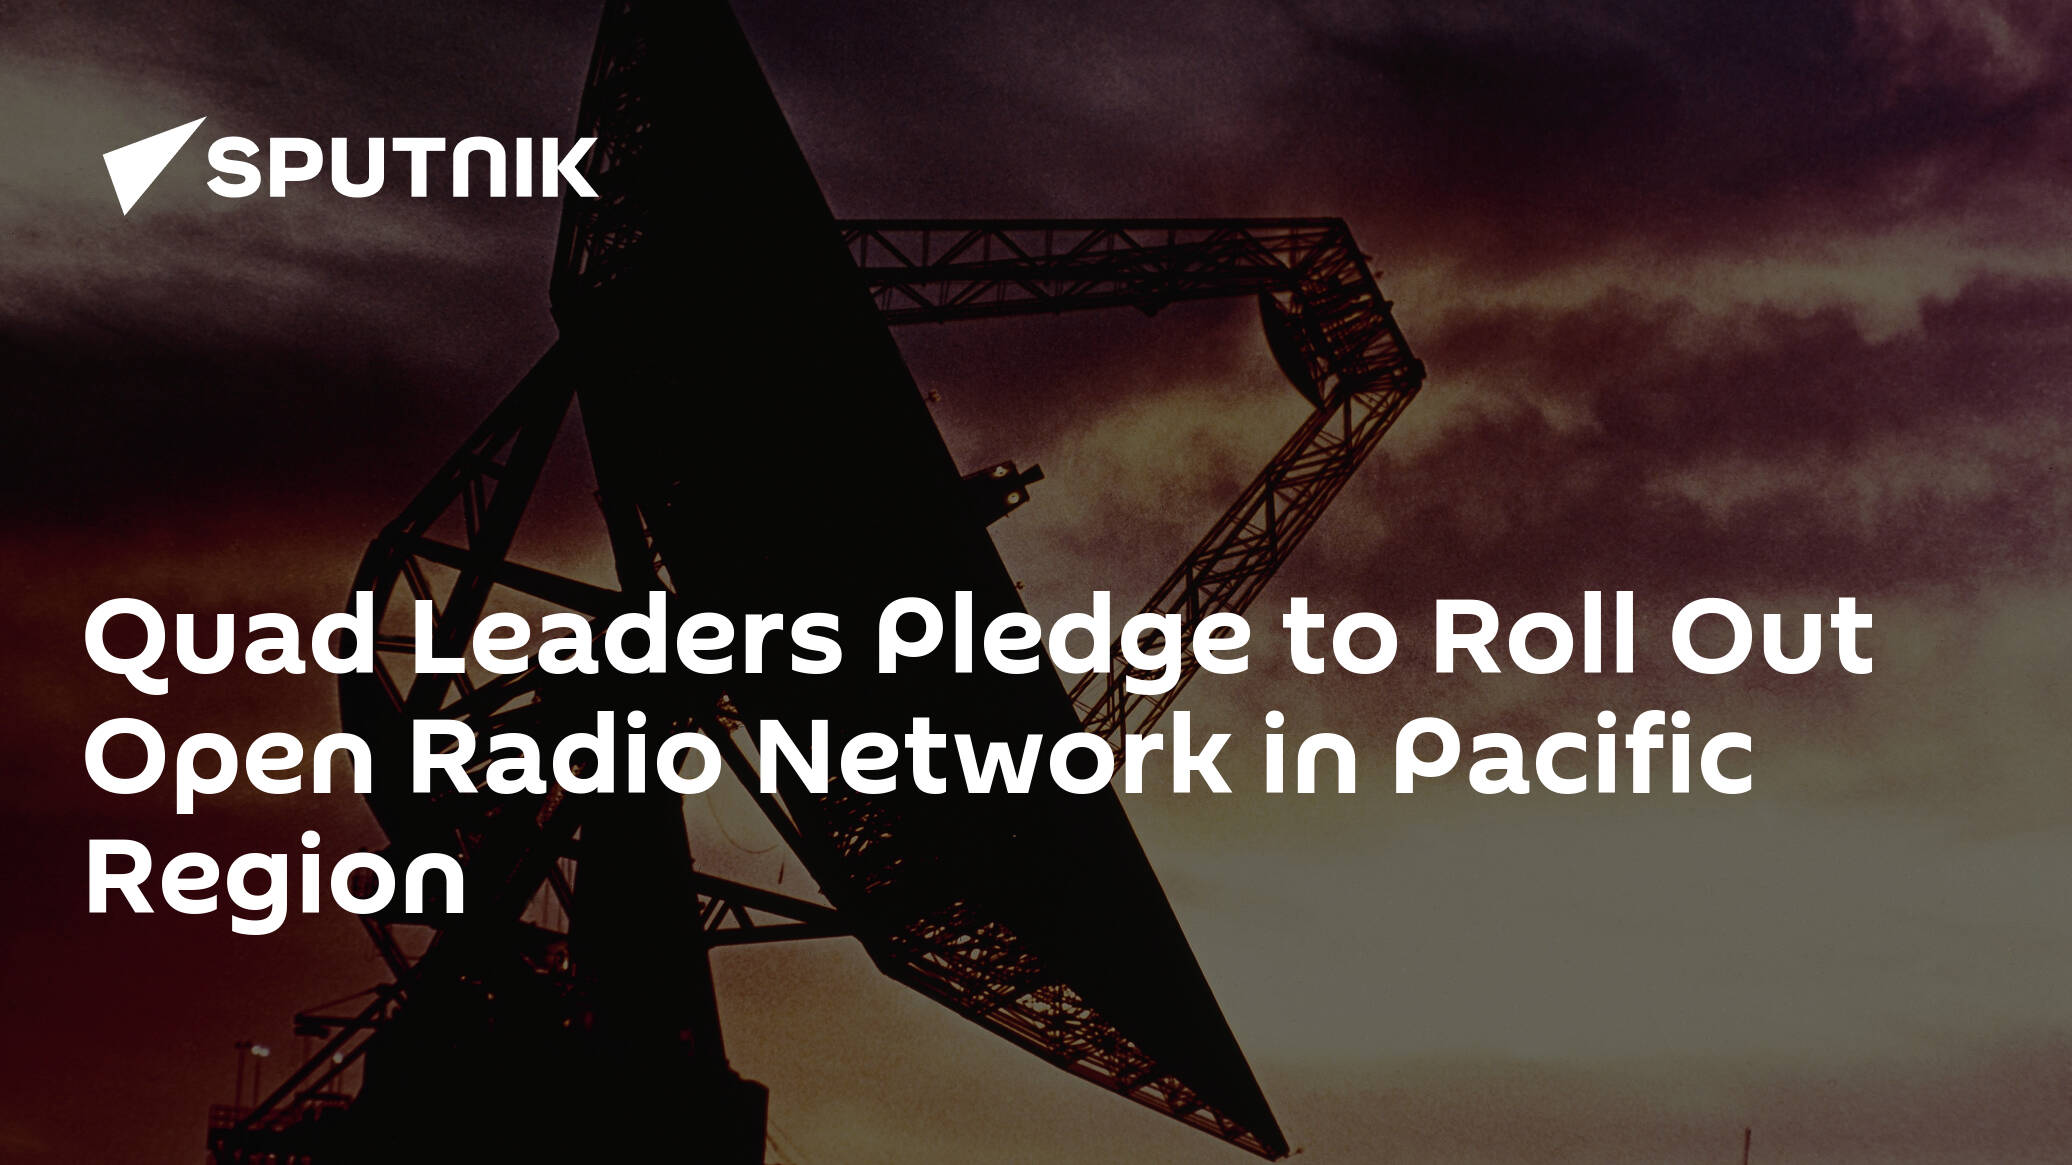 Quad Leaders Pledge to Roll Out Open Radio Network in Pacific Region